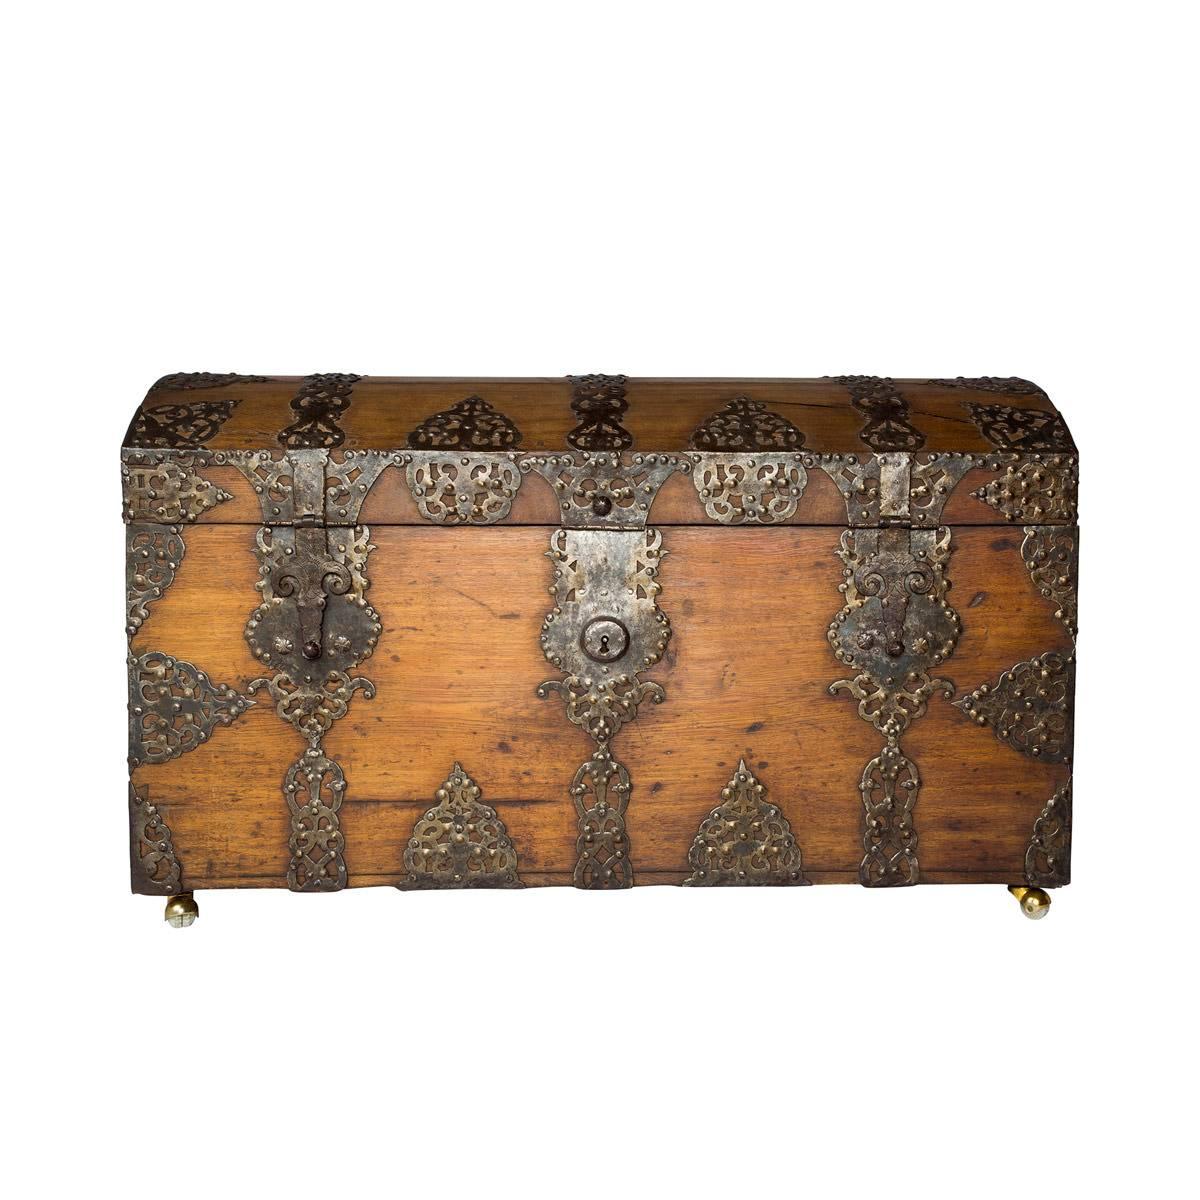 Attributed to the 18th century, this incredibly large and monumental Danish trunk is in incredible condition for its age, comprised of oak and ornamental iron hardware which harks back to the Baroque period. The domed top opens to a smooth, sizable,